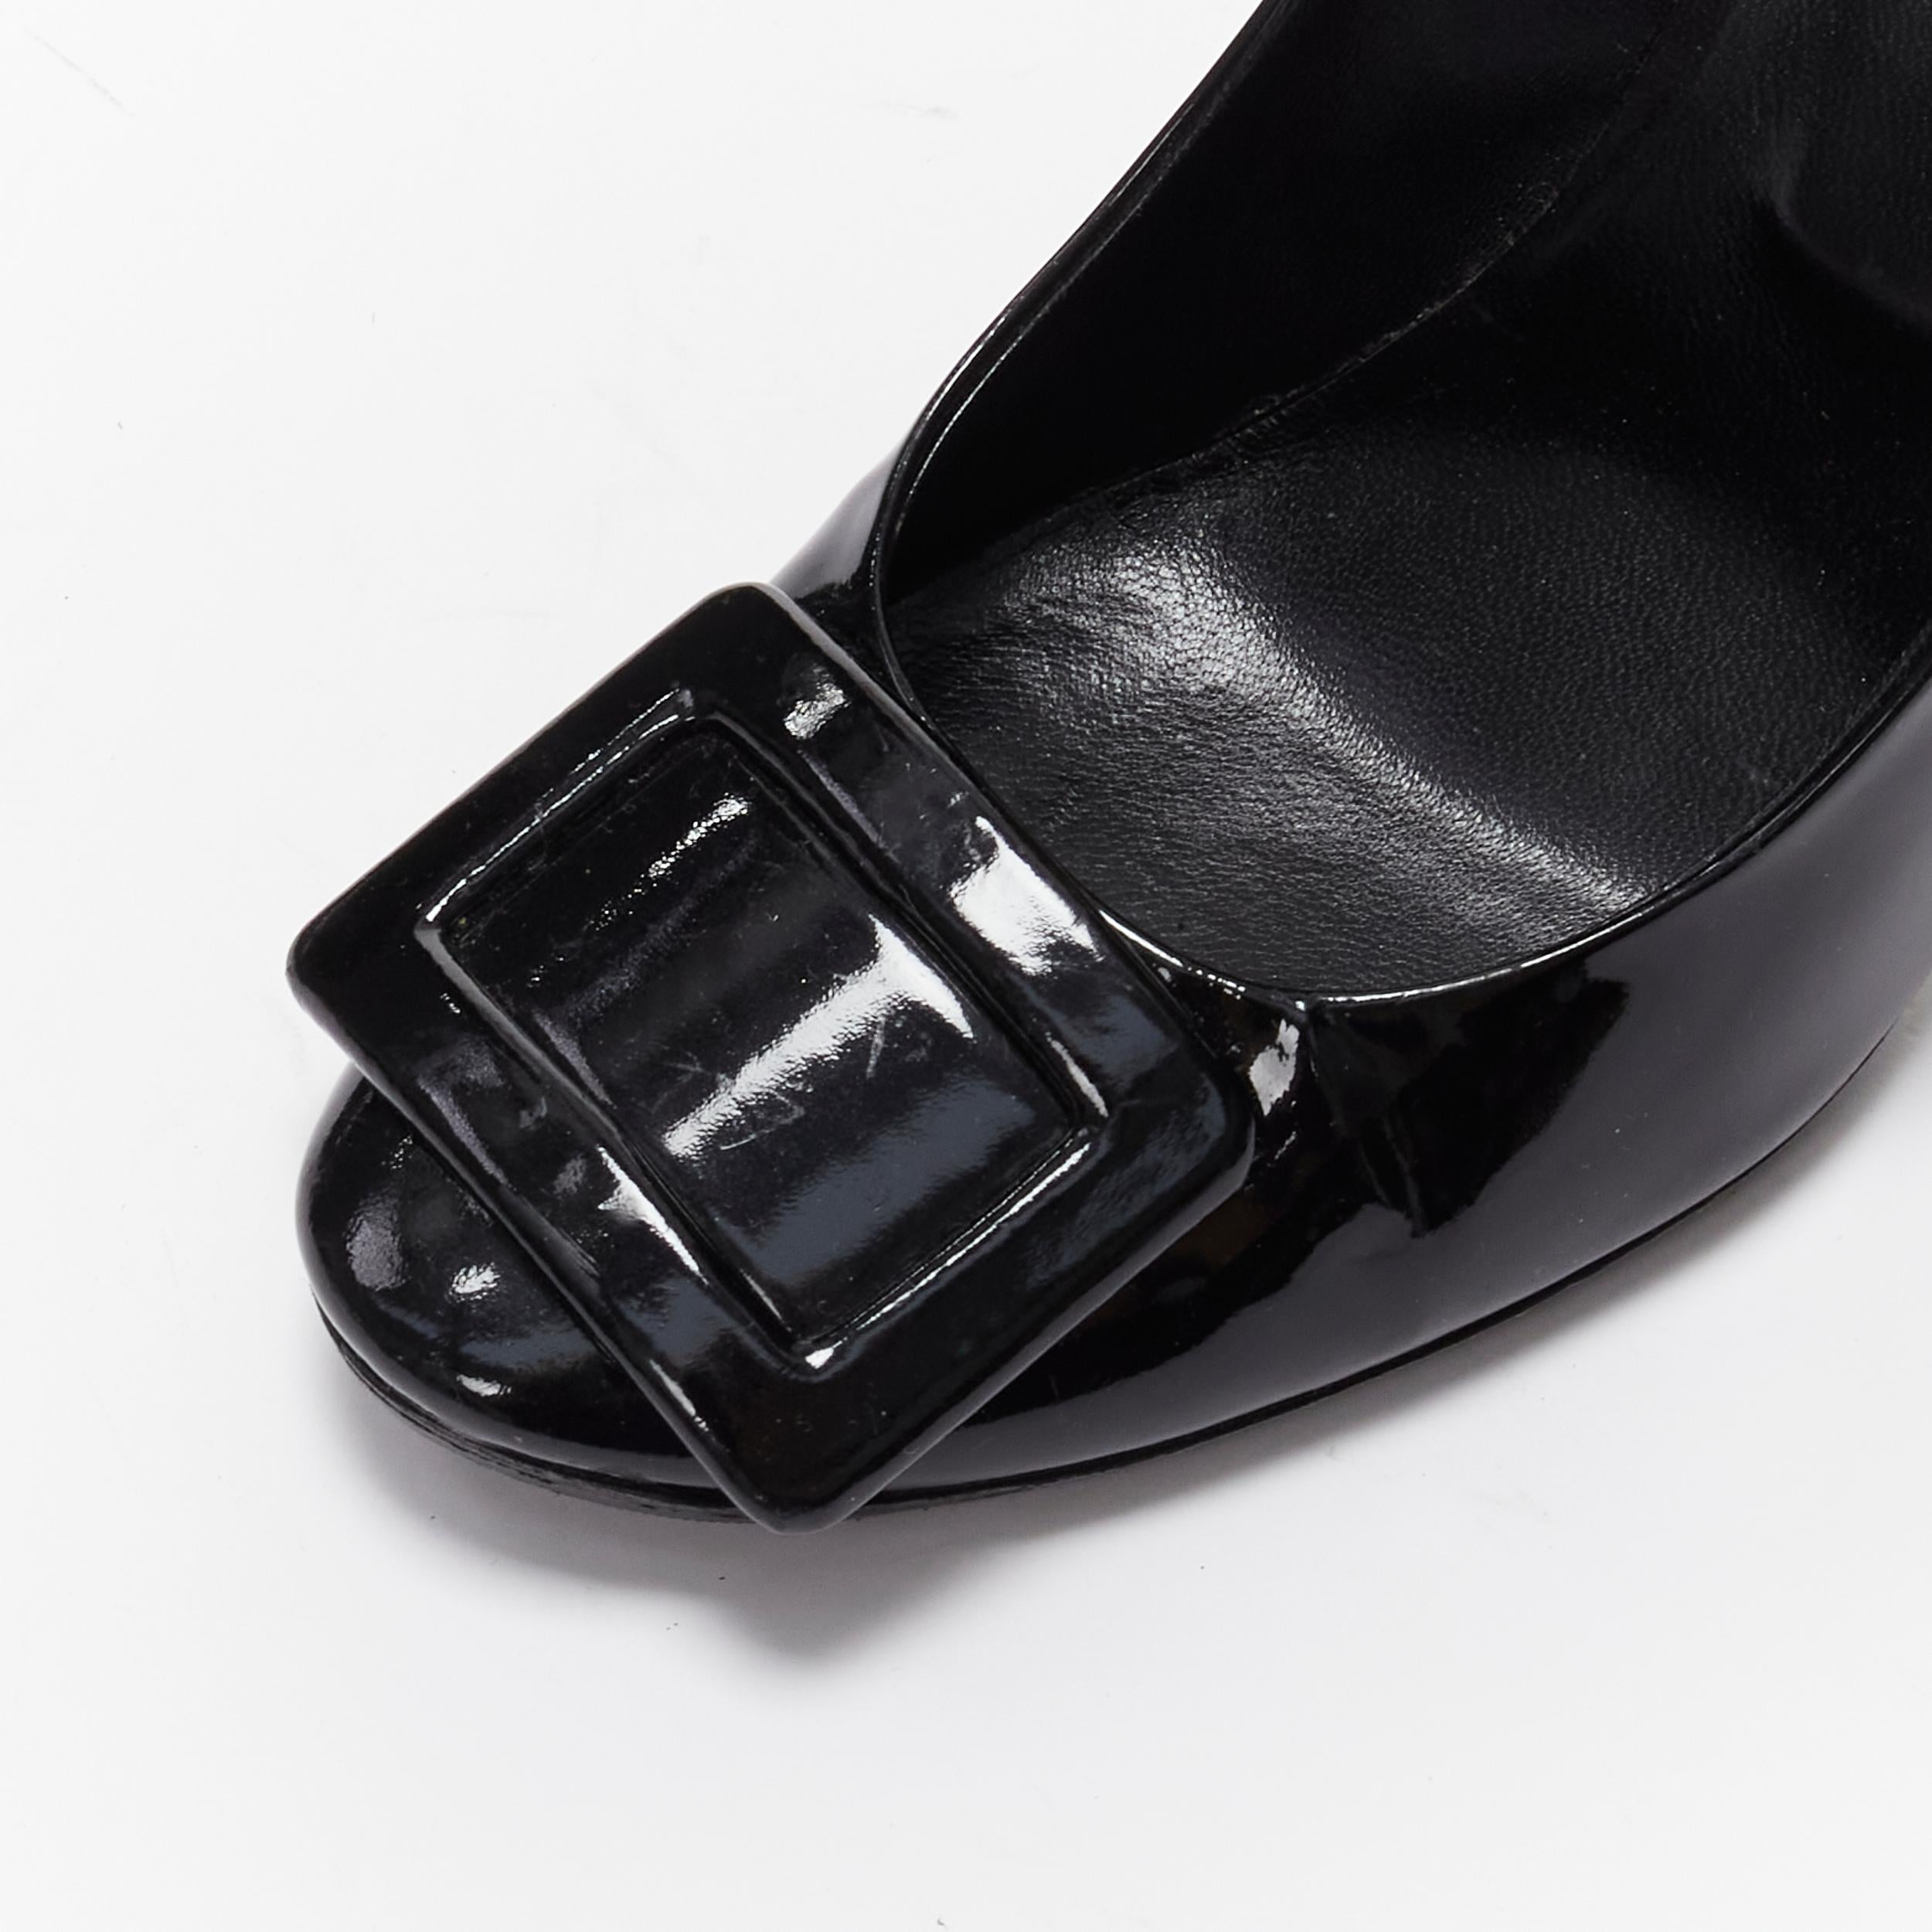 ROGER VIVIER Trompette black patent leather buckle curved heel pumps EU38
Reference: GIYG/A00268
Brand: Roger Vivier
Model: Trompette
Material: Patent Leather
Color: Black
Pattern: Solid
Closure: Slip On
Lining: Black Leather
Made in: